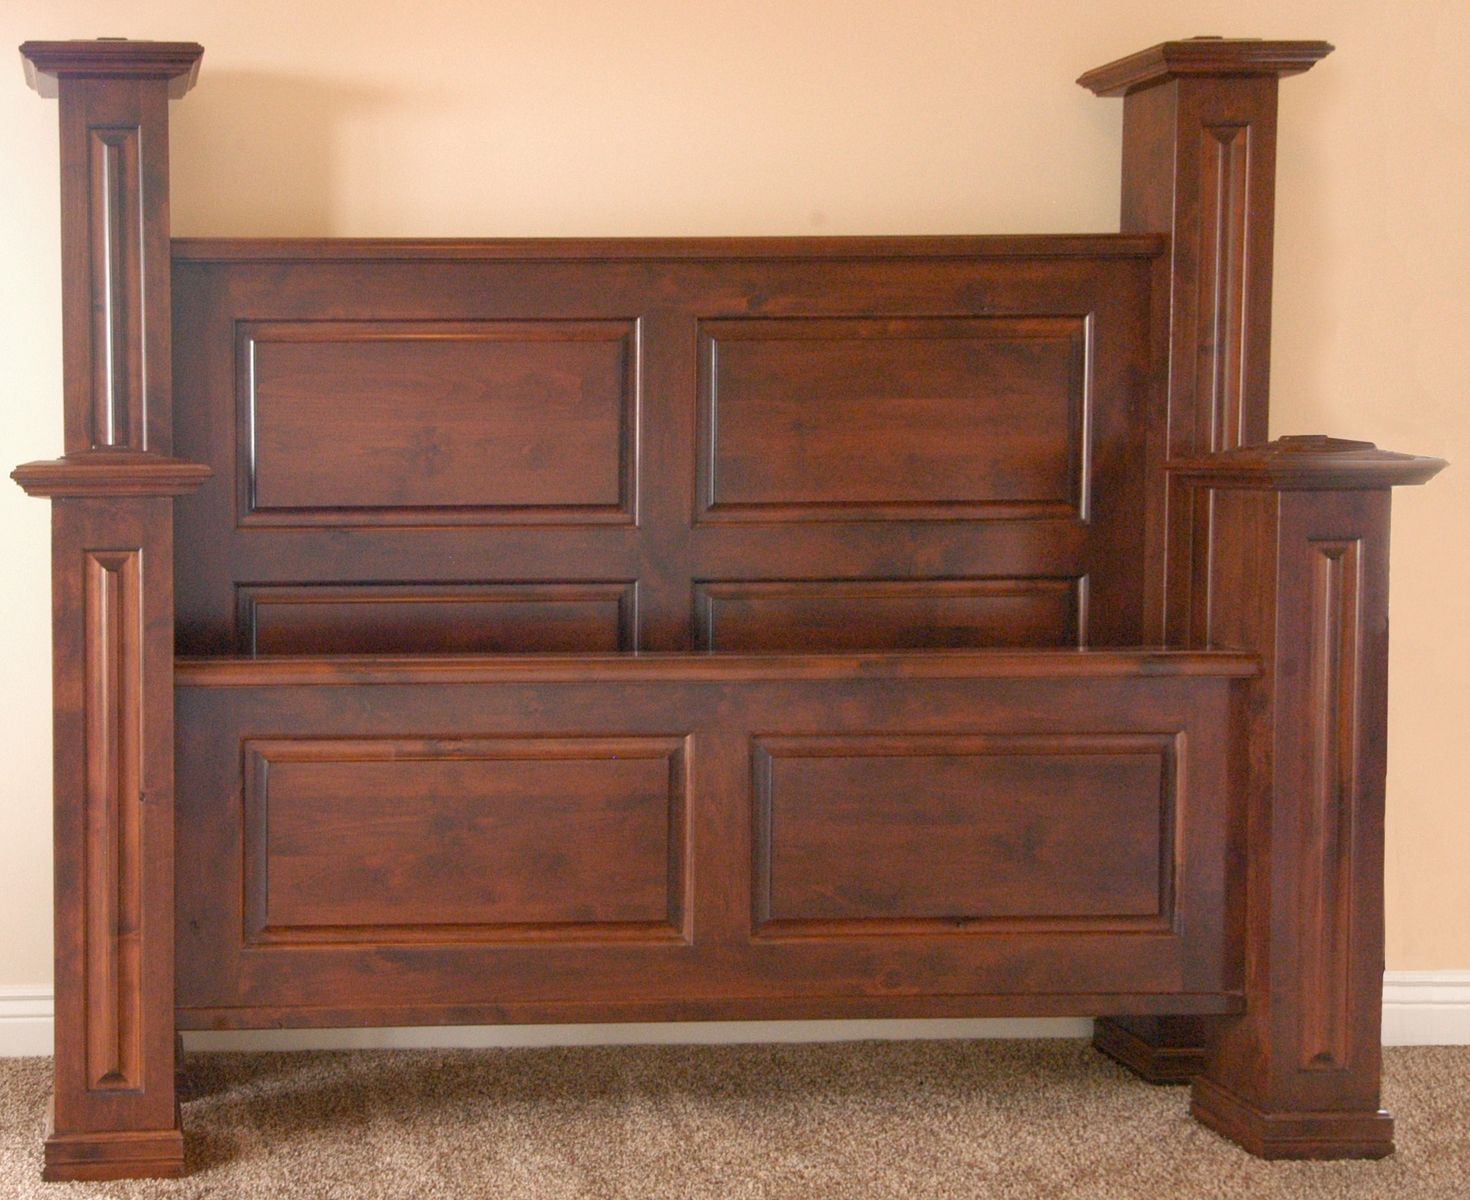 Custom Made Newel Post Bed by Terry\u0026#39;s Fine Woodworking | CustomMade.com